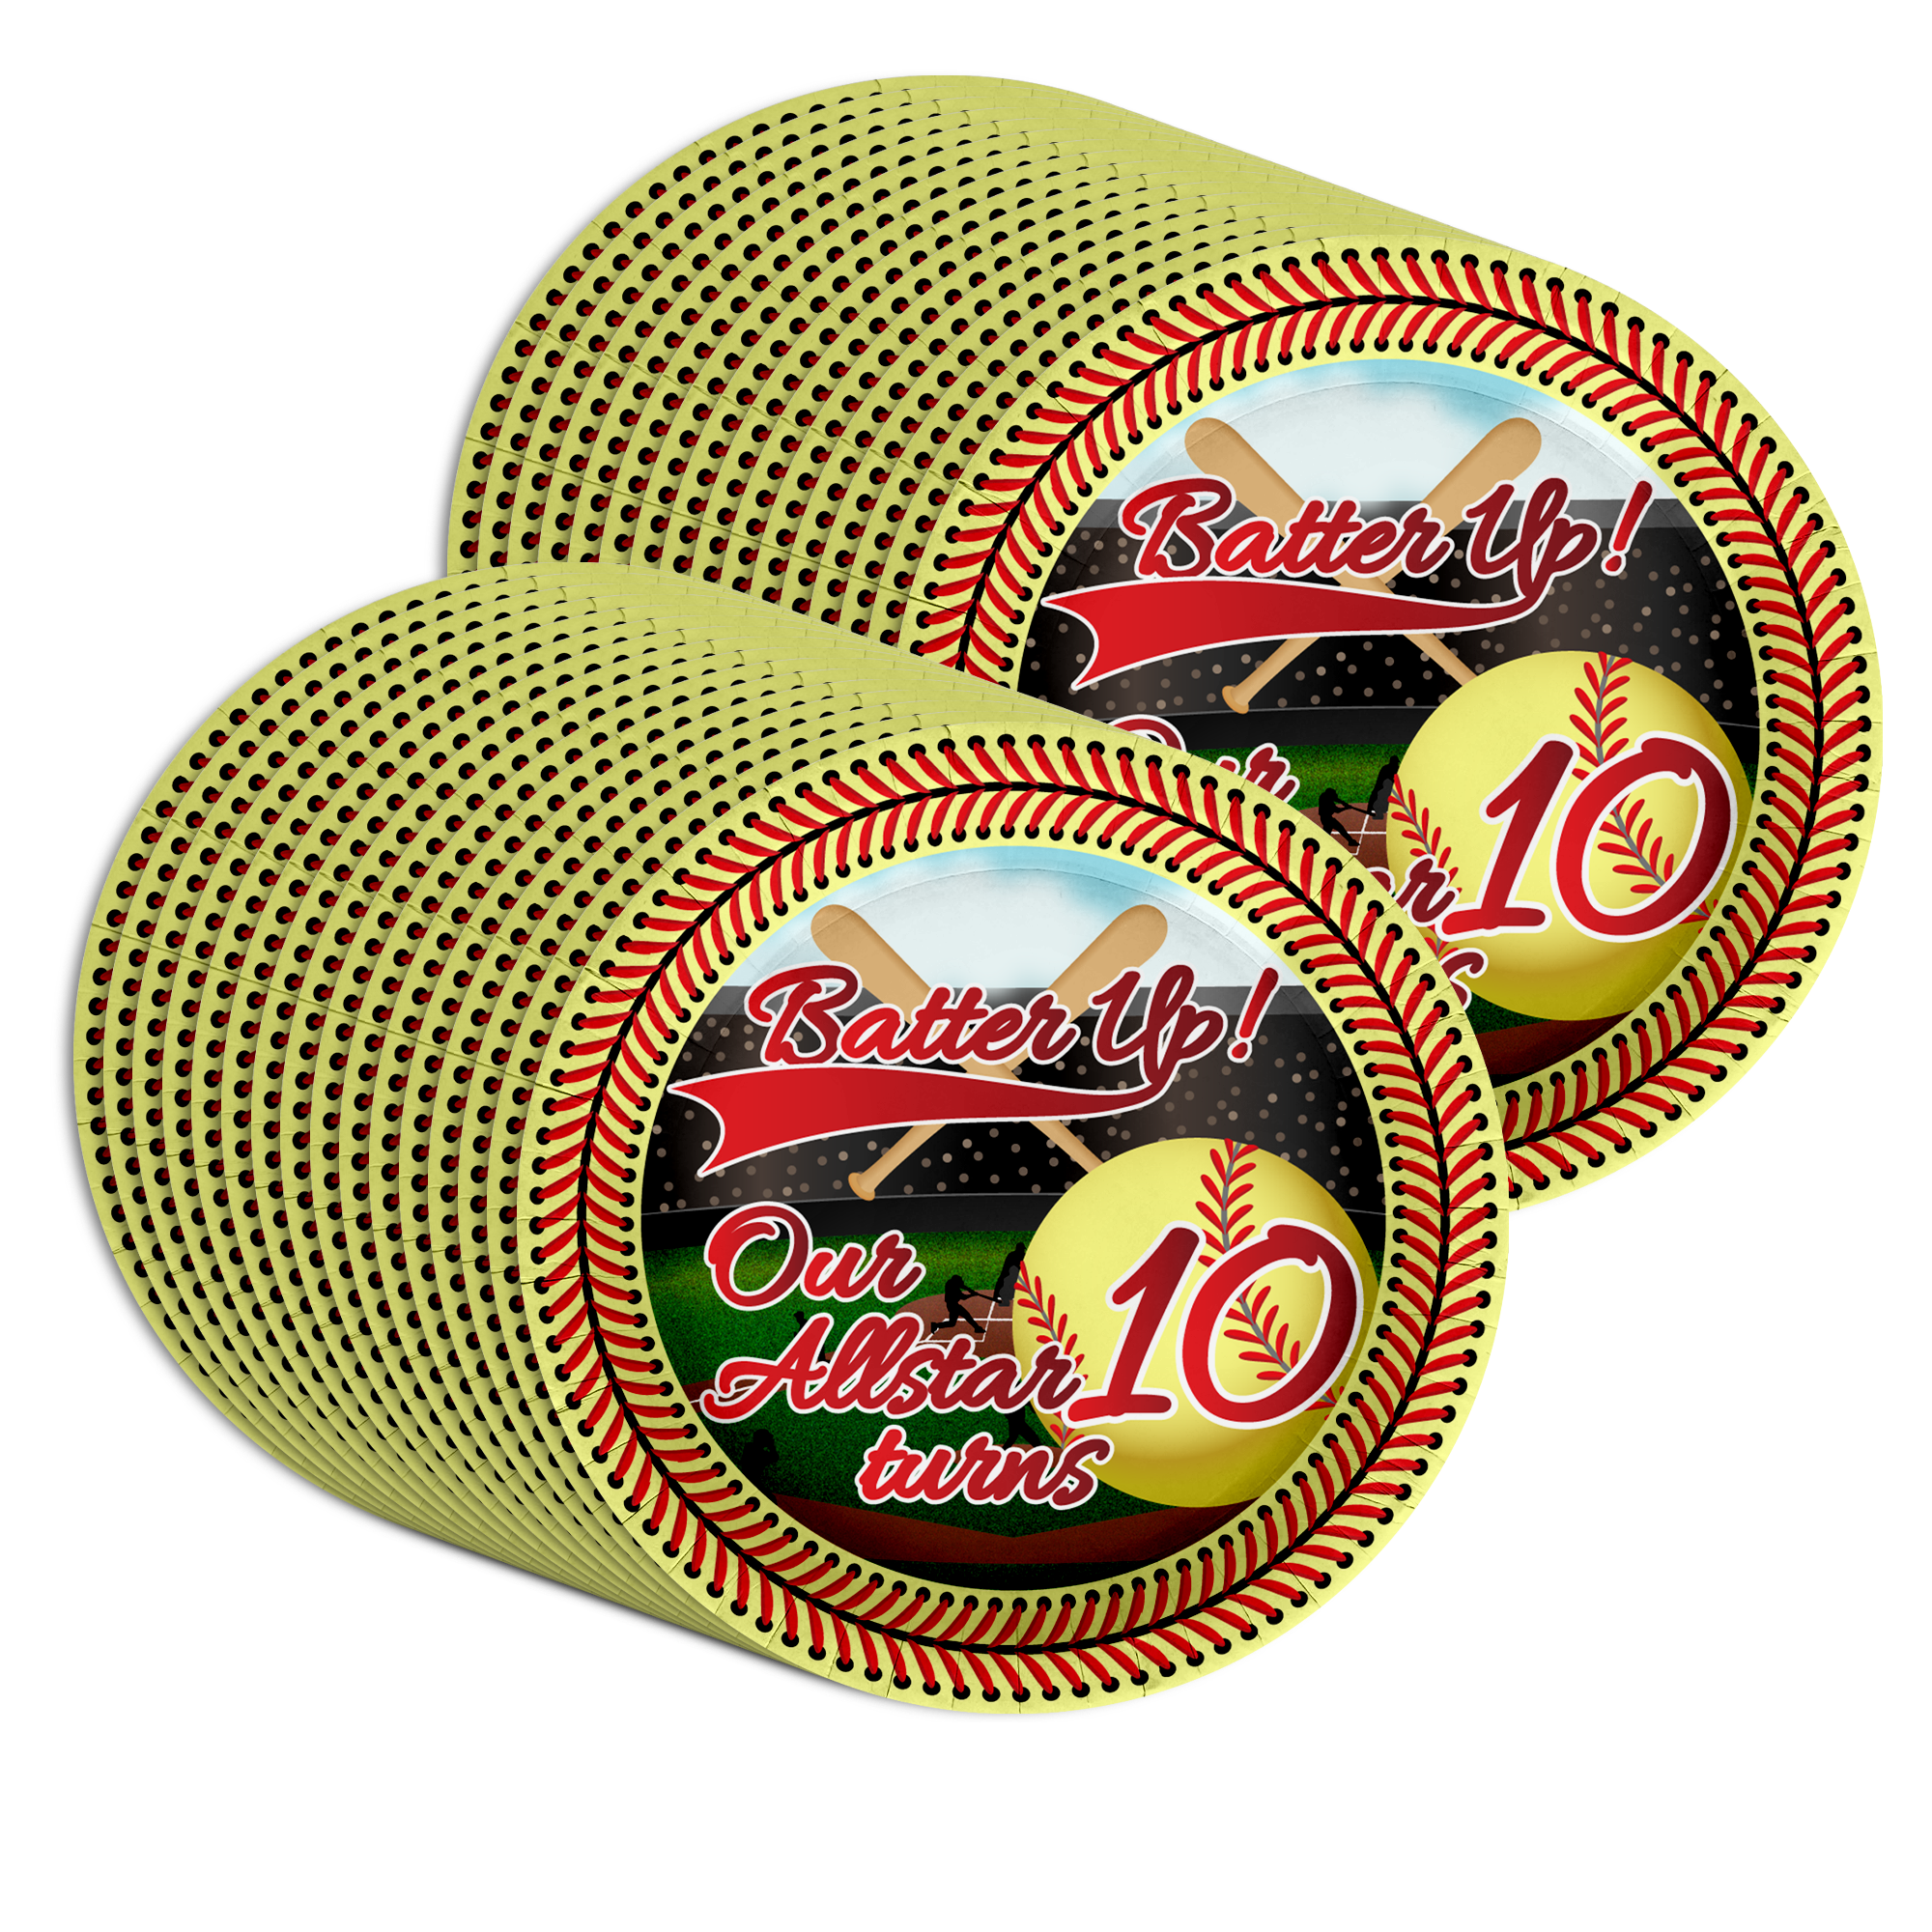 Softball 10th Party Supplies Large 9" Paper Plates in Bulk 32 Piece